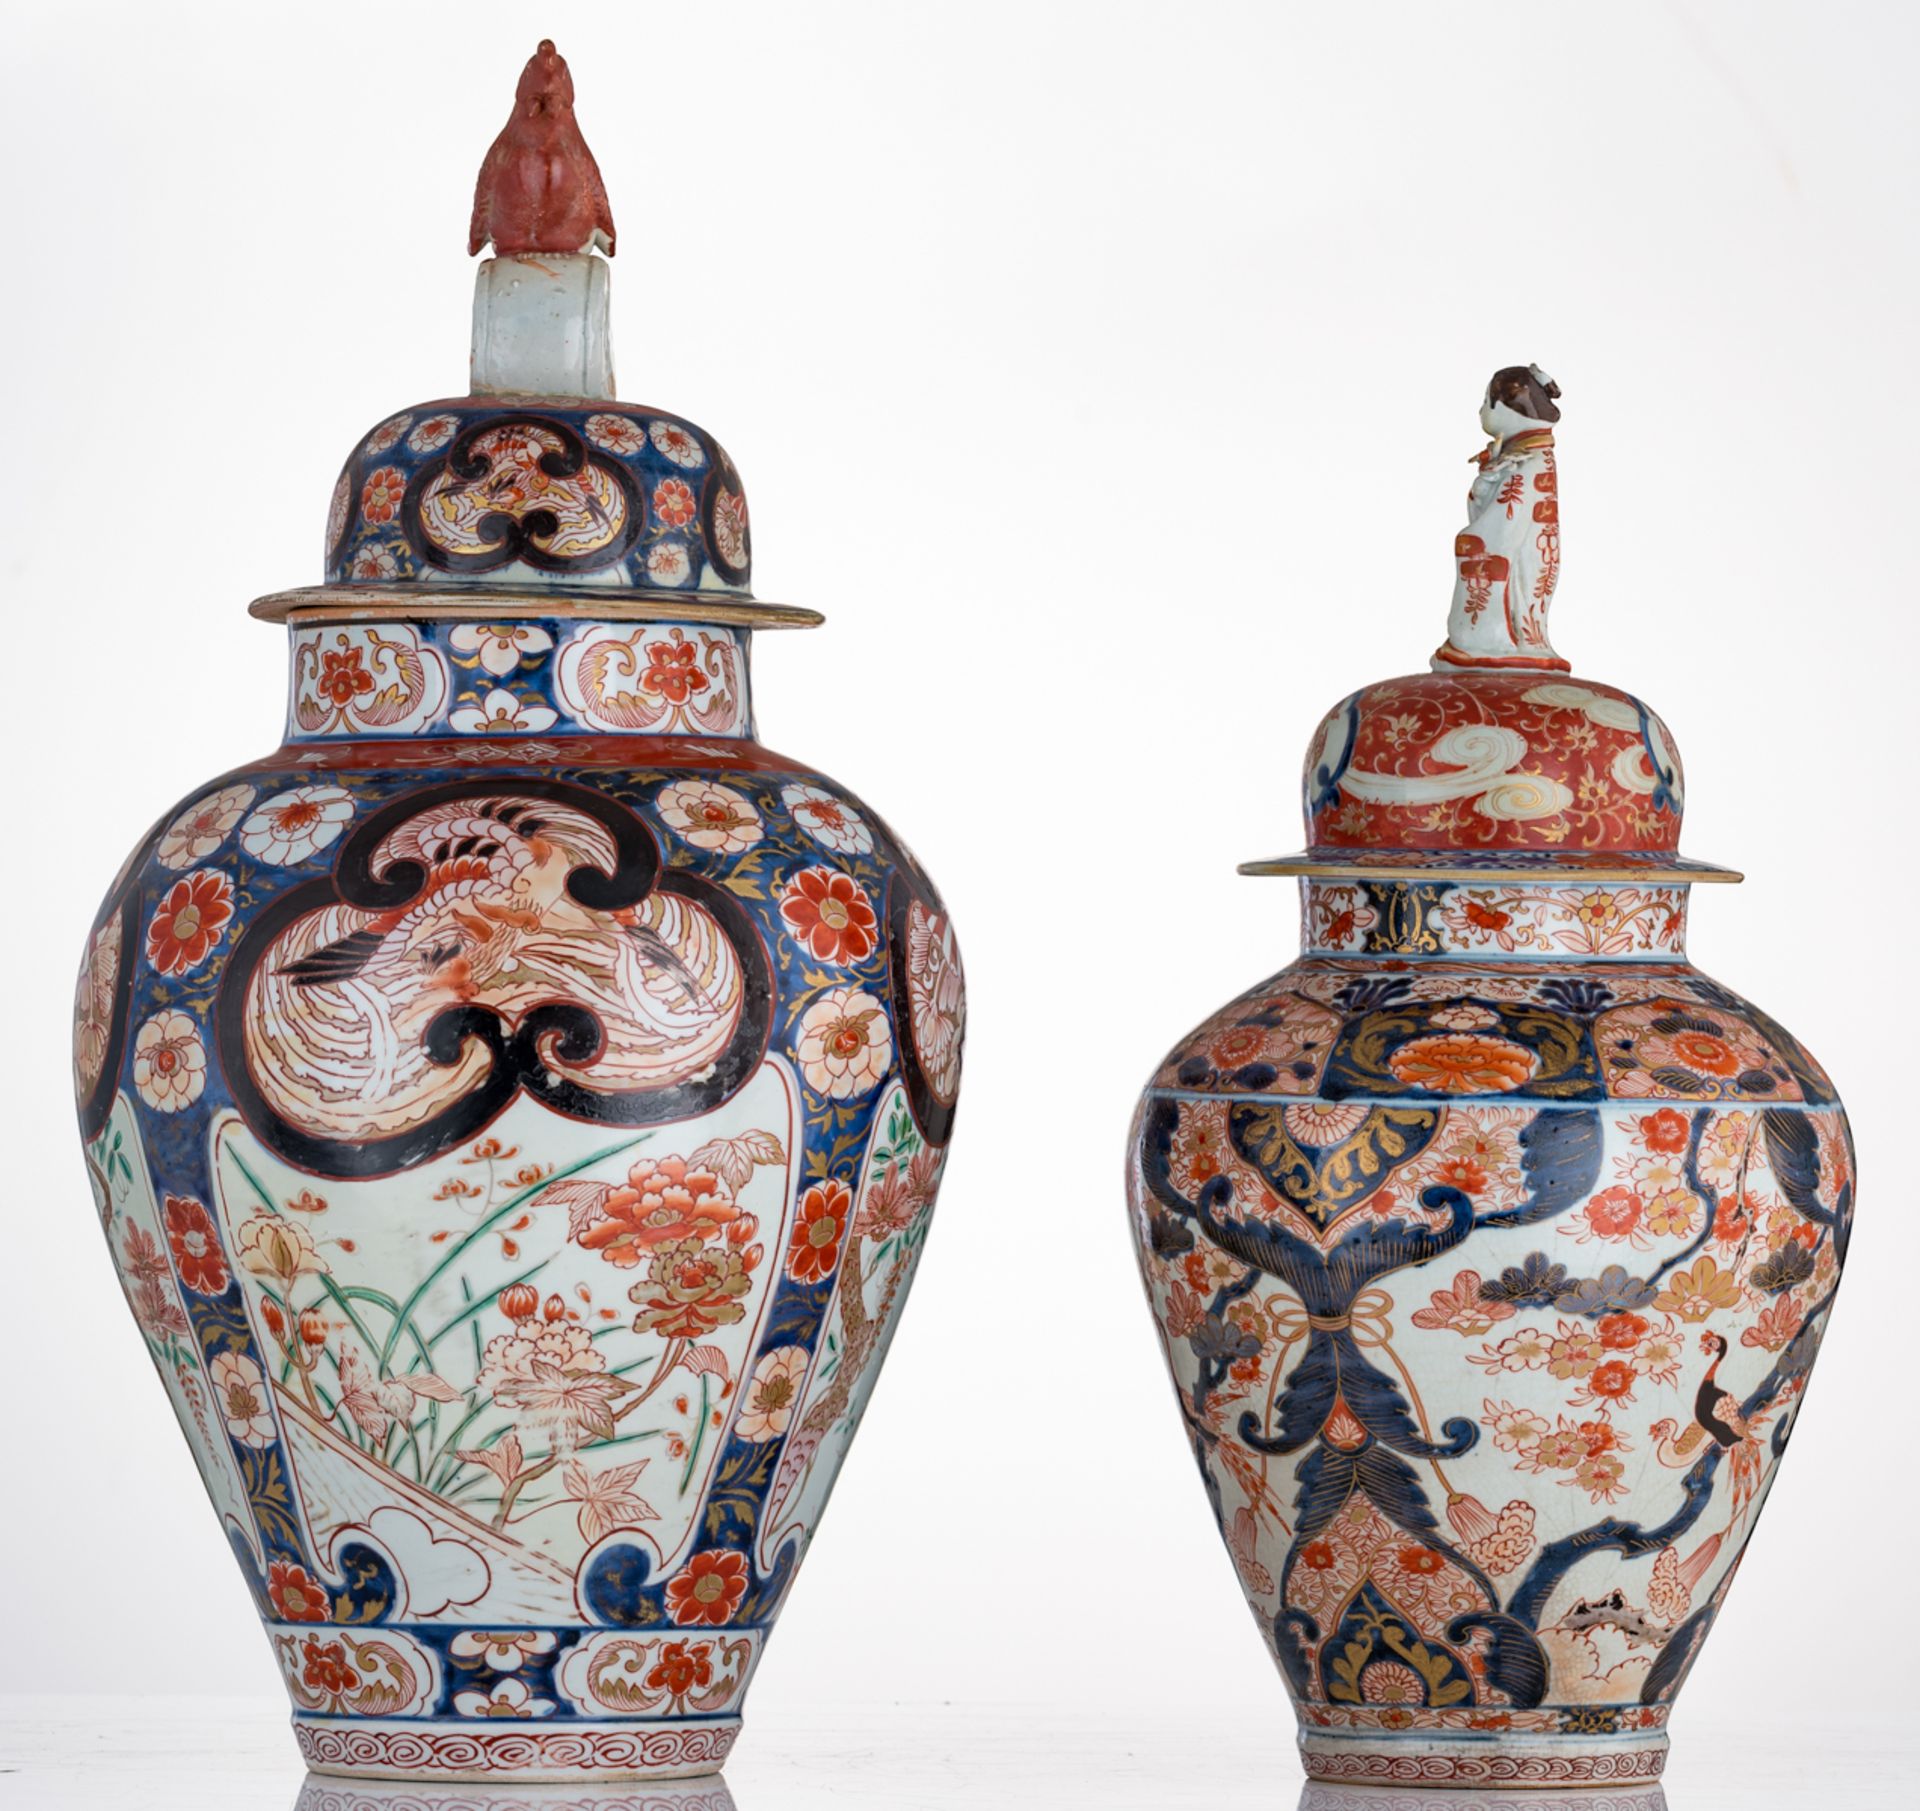 A Japanese Arita Imari covered jar, decorated with flower sprays and with panels, filled with wister - Image 2 of 6